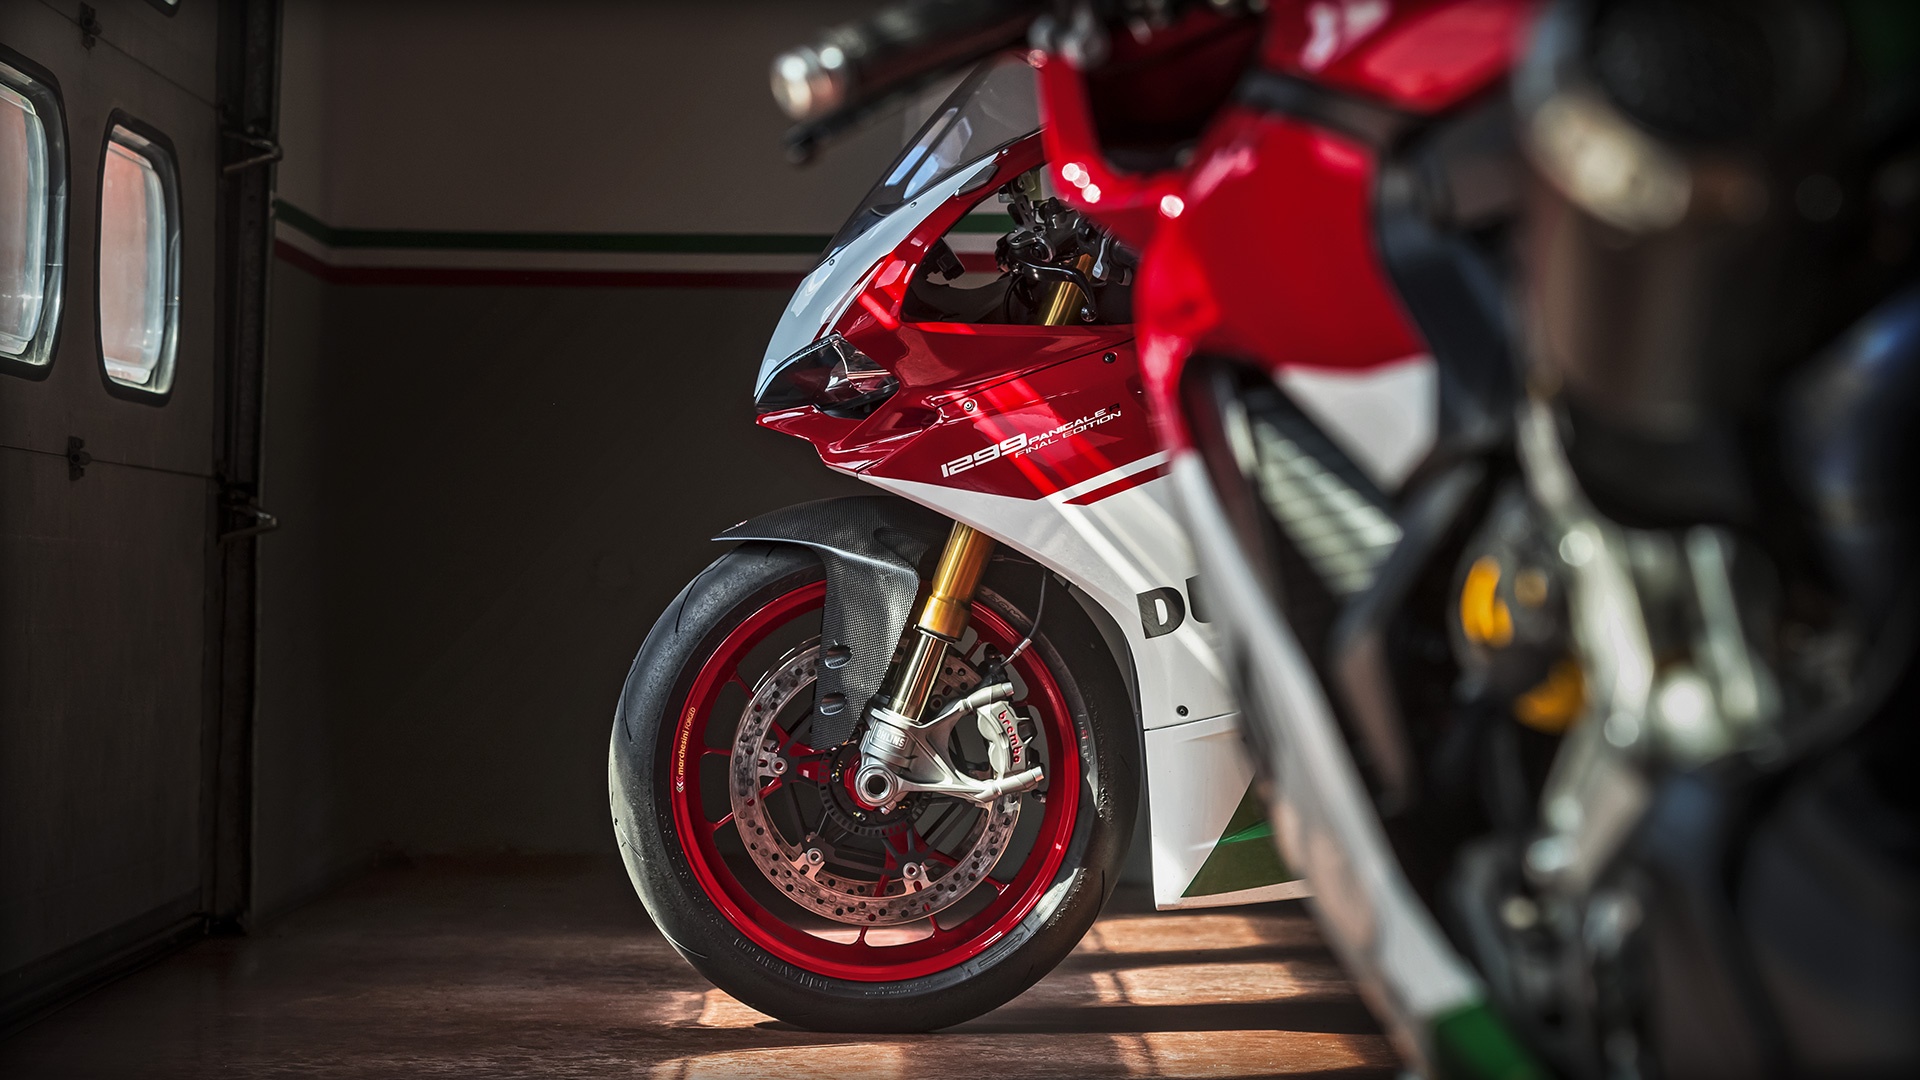 panigale_final-edition_2018_ambience_fe_01_gallery_1920x1080-mediagallery_output_image_1920x1080